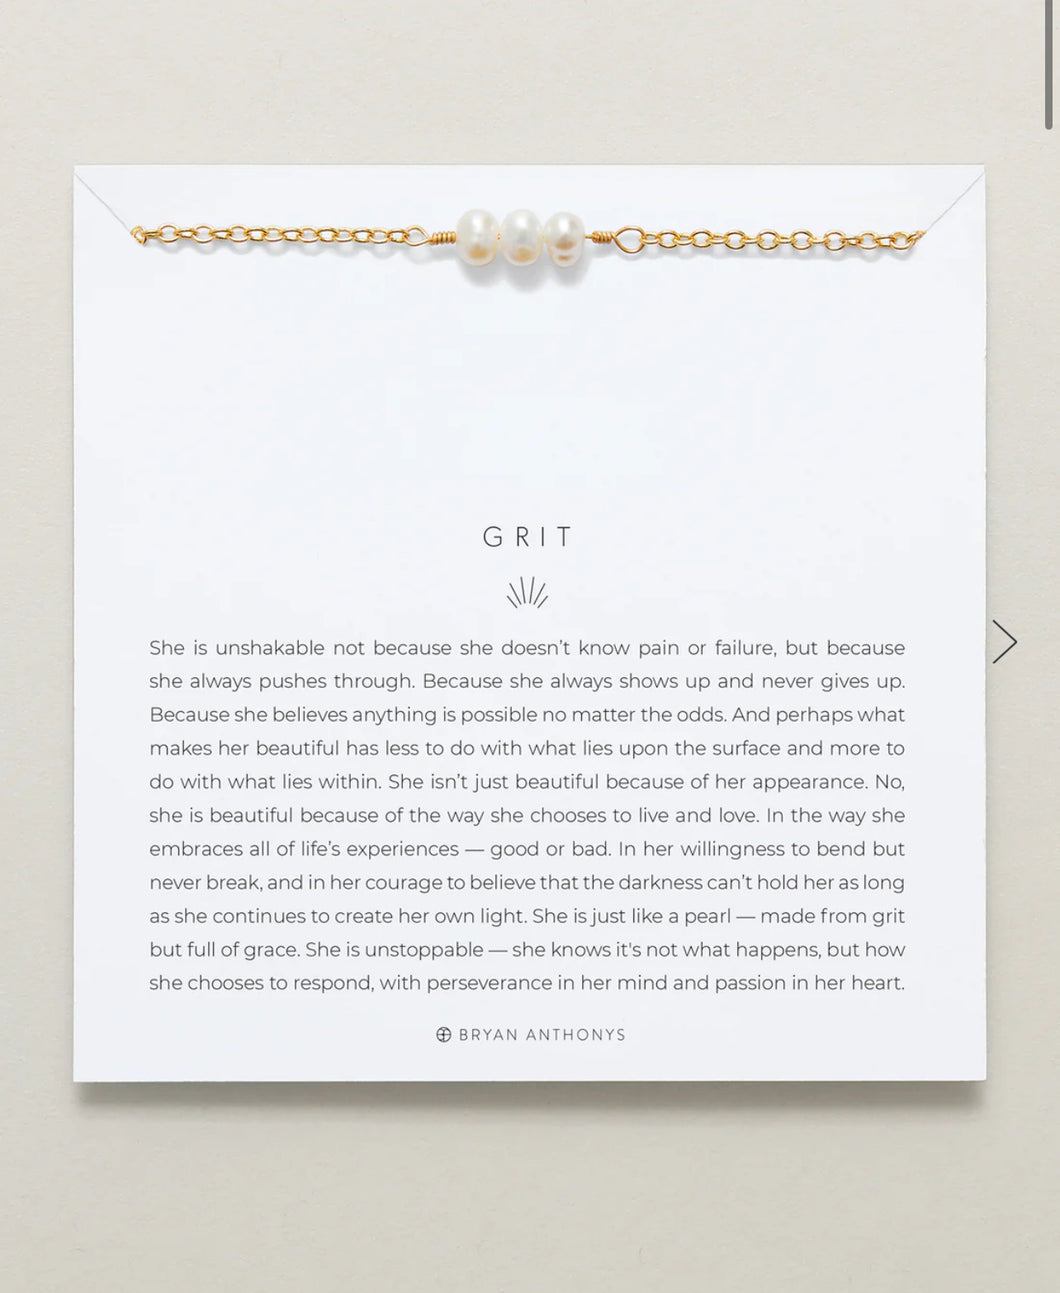 Bryan Anthonys: Grit Dainty Chain Bracelet in Gold